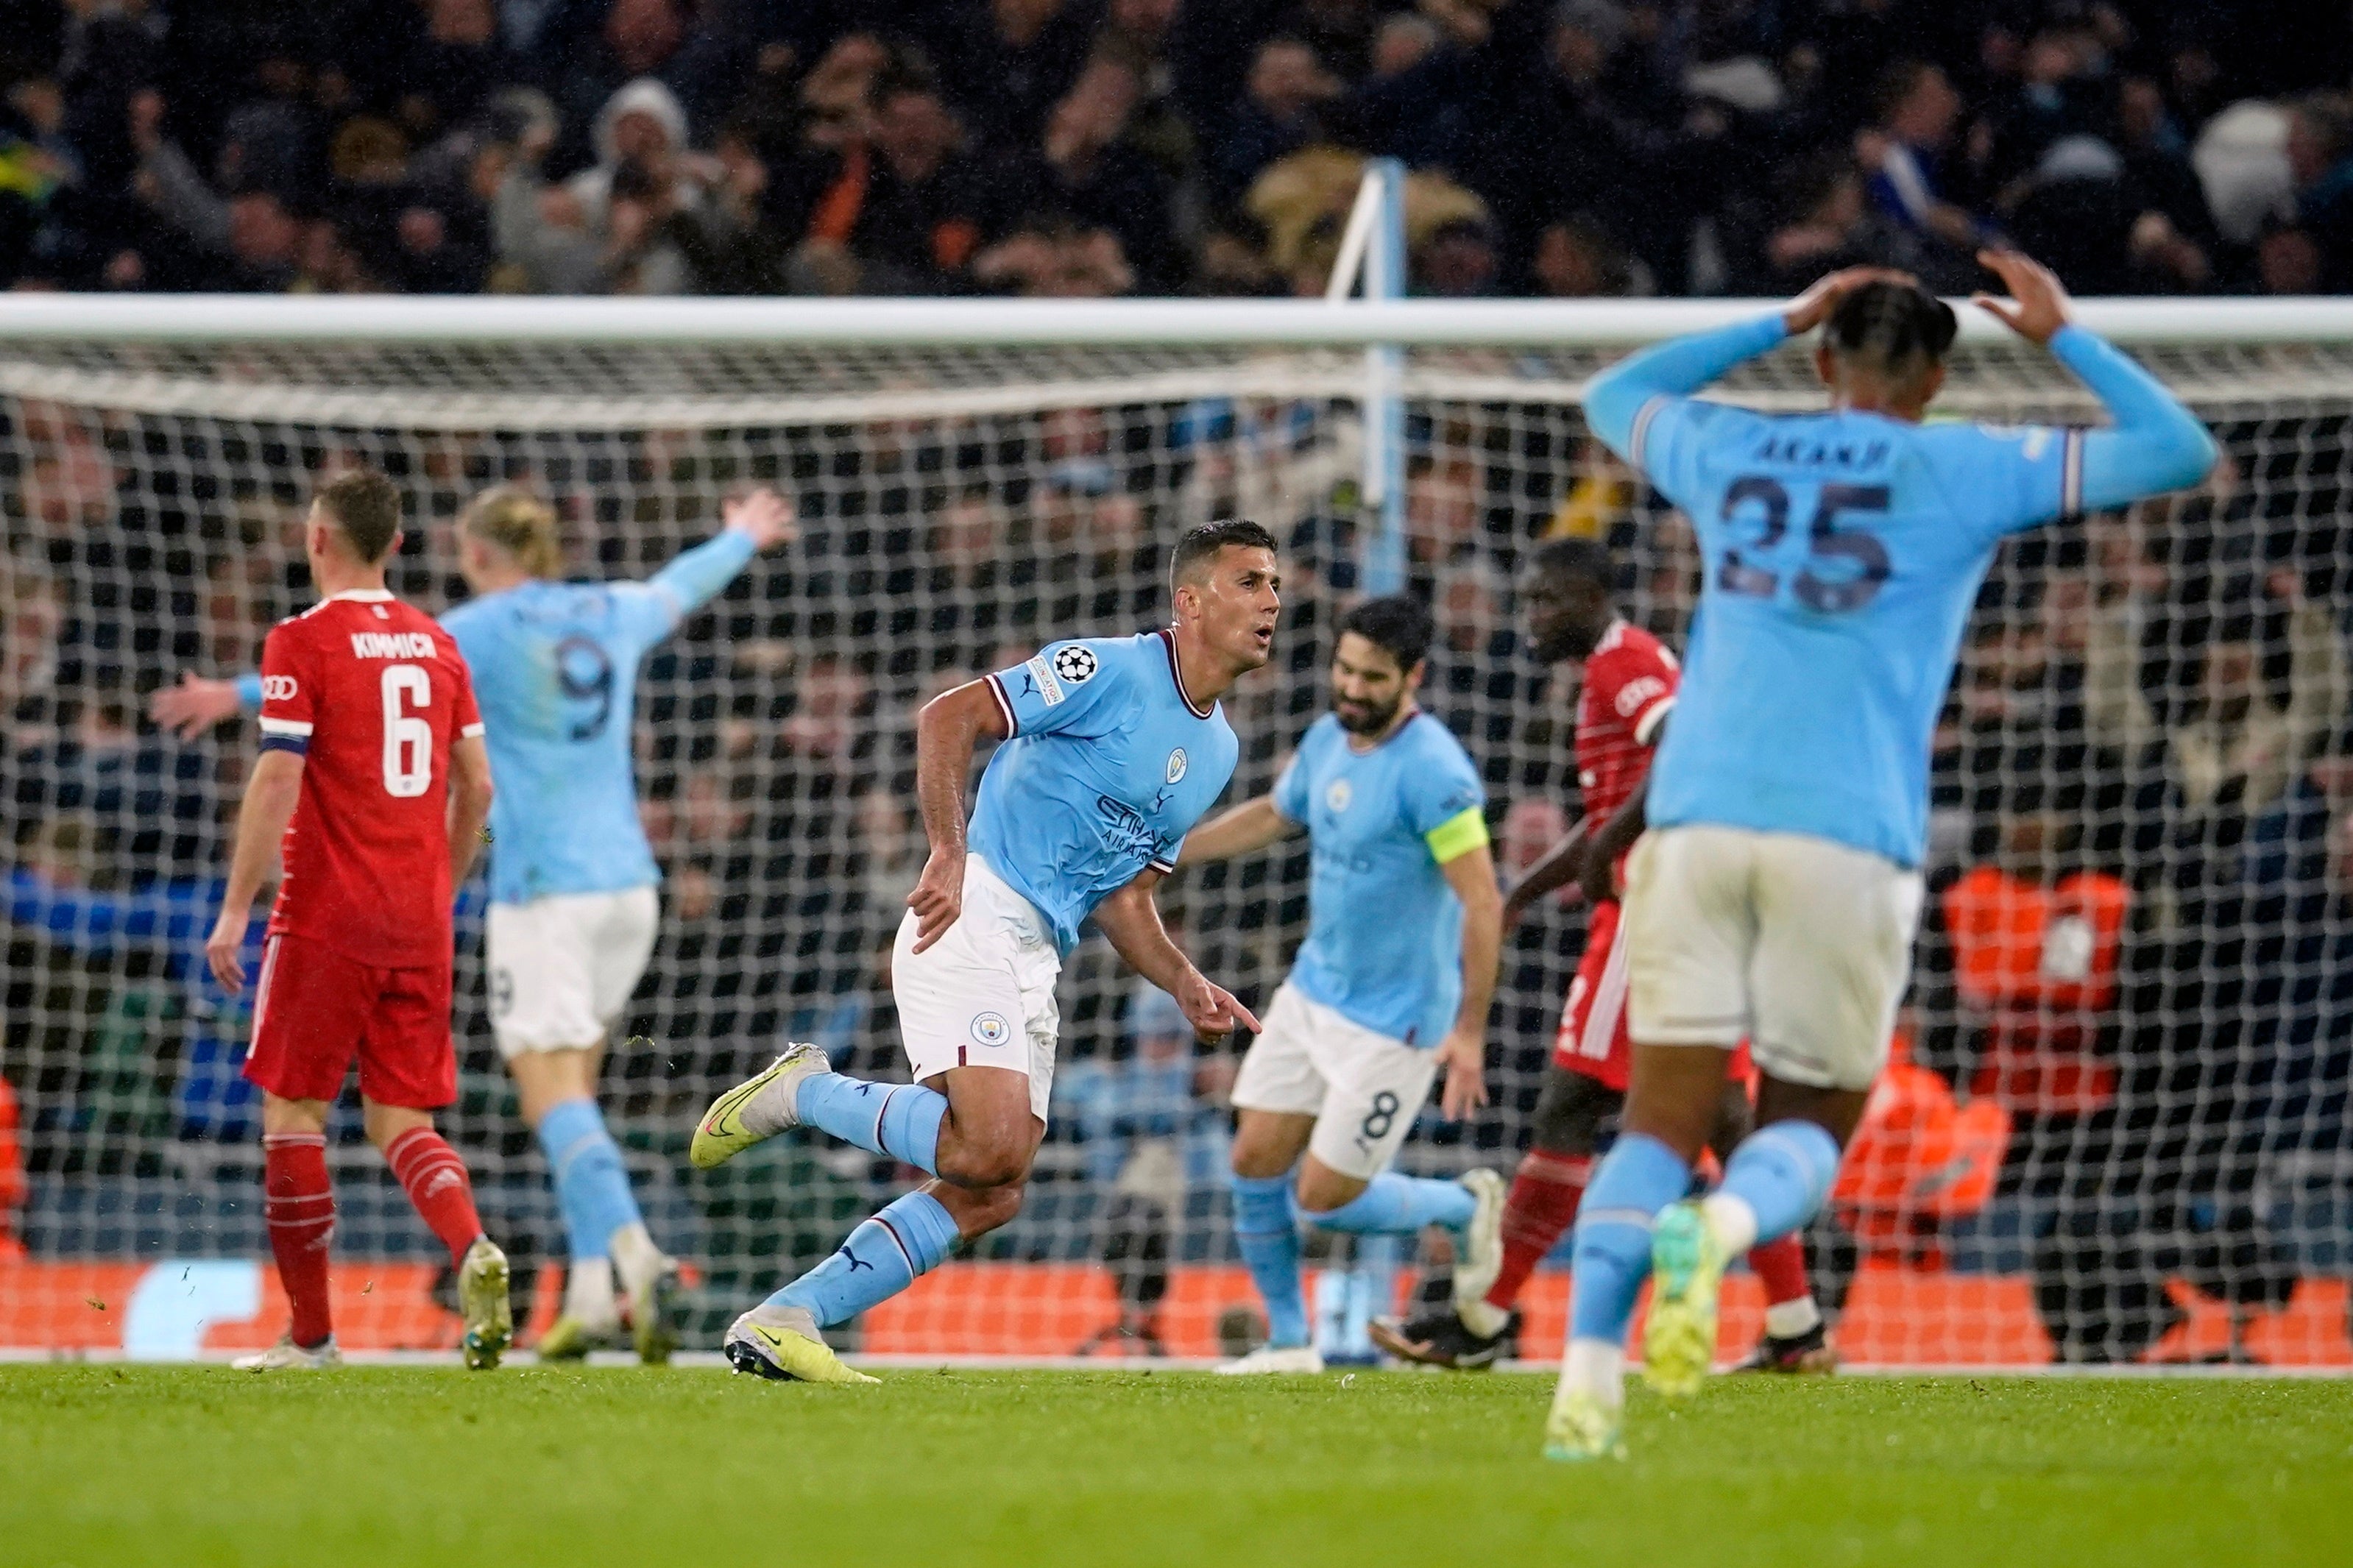 Rodri’s goal sparked Man City to a huge win over Bayern